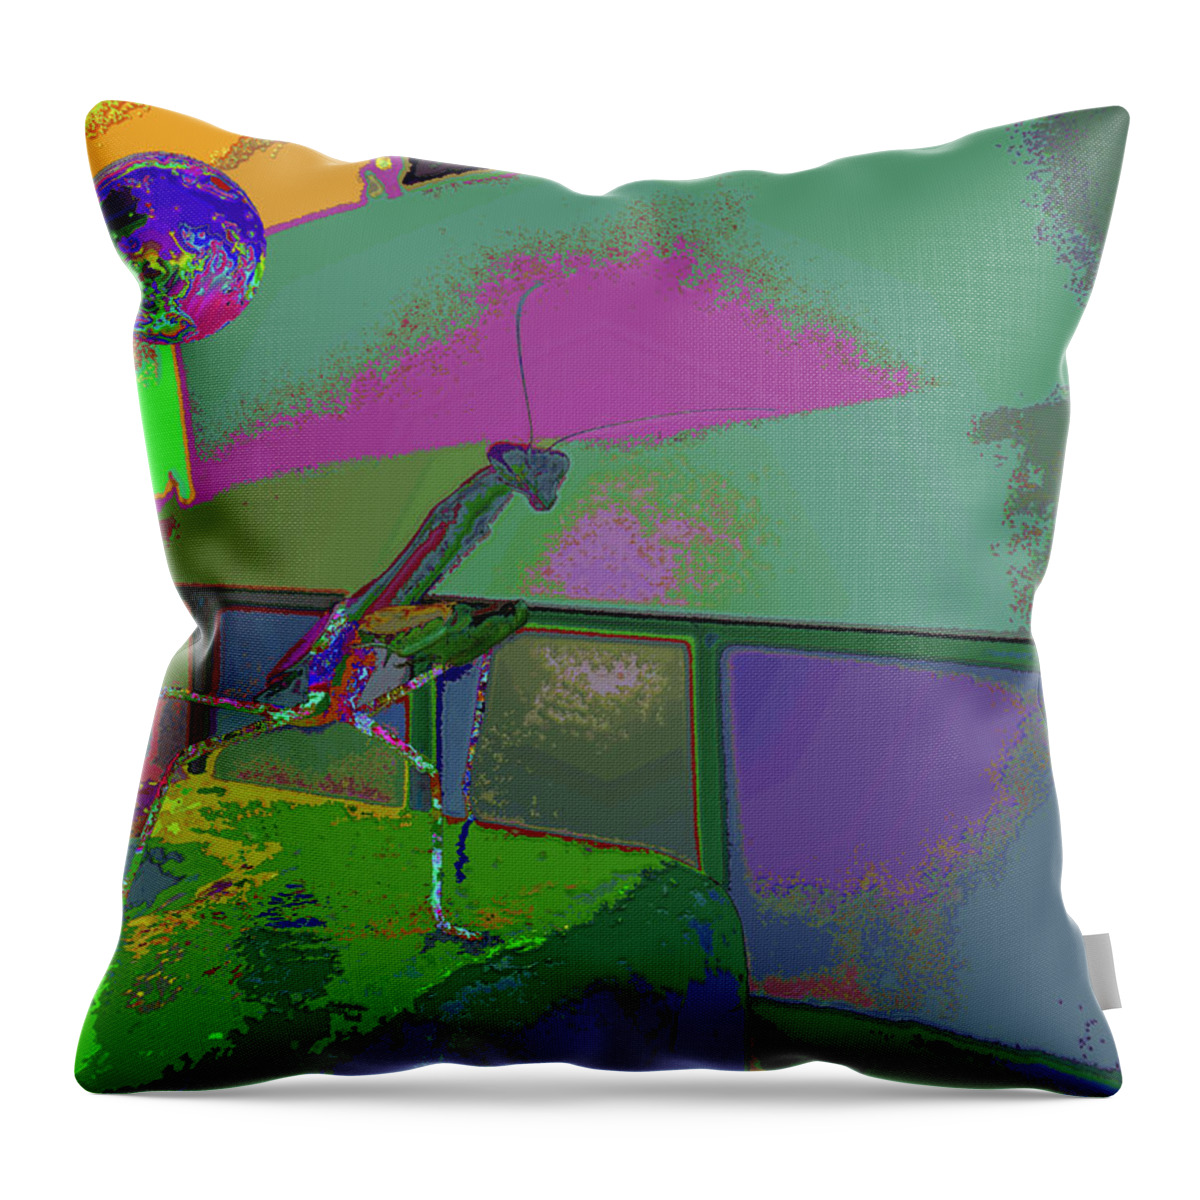 Mantis In Your Shade Of Play Throw Pillow featuring the photograph Mantis In Your Shade Of Play by Kenneth James